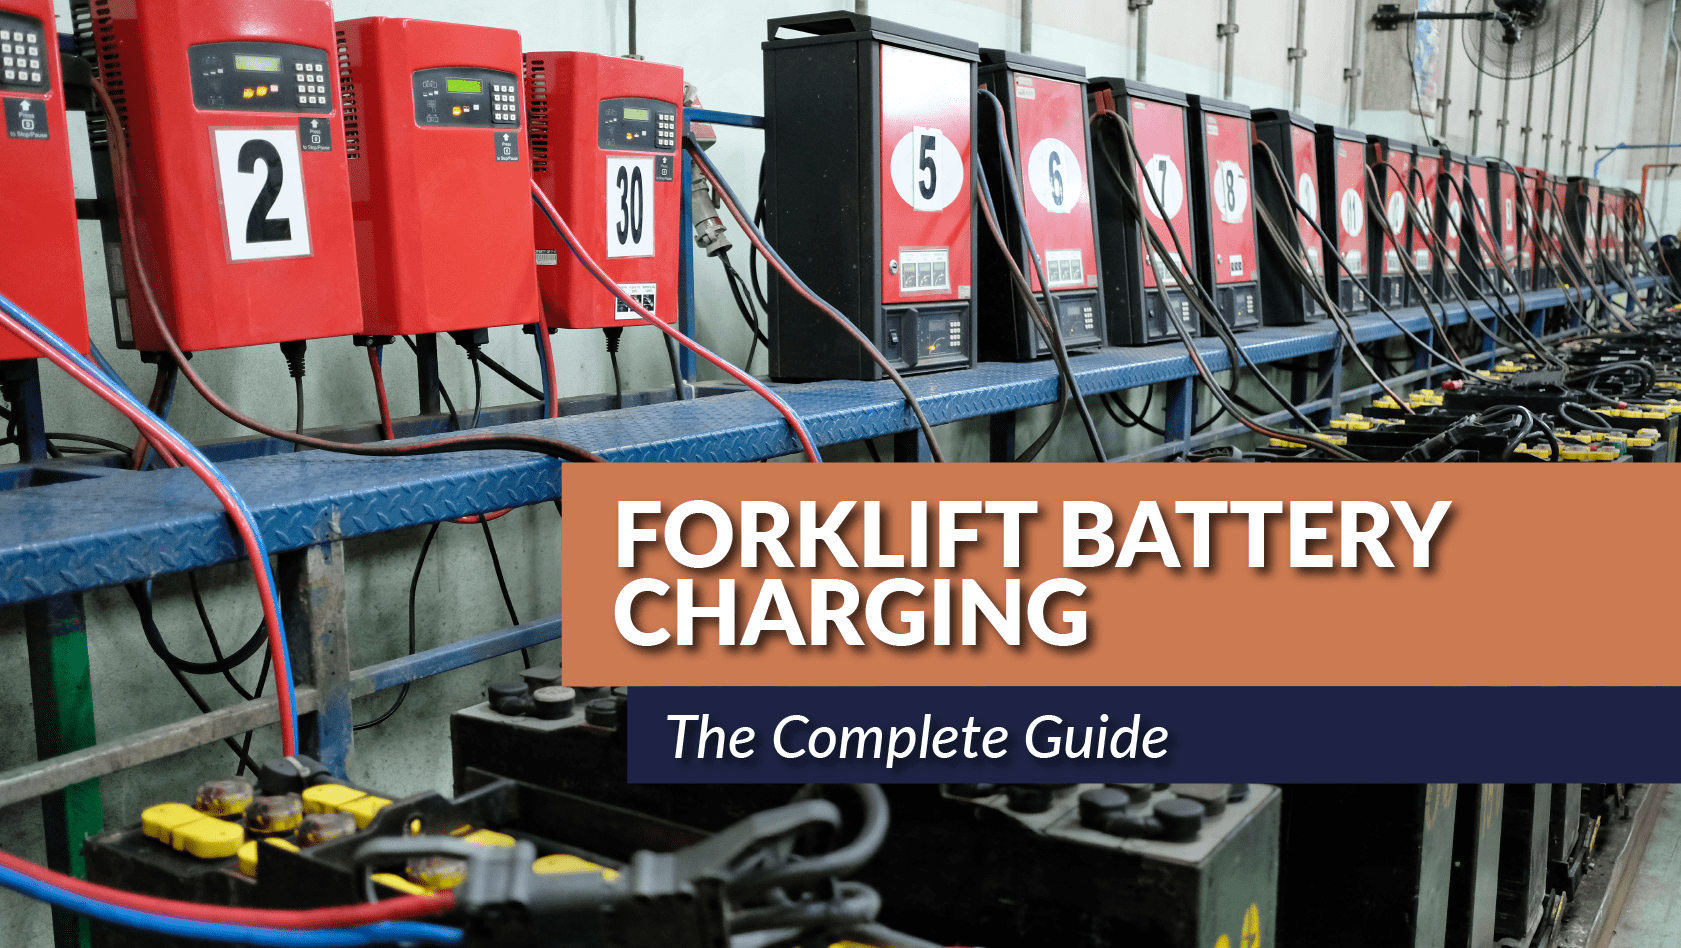 Forklift Battery Charging: The Complete Guide - Foxtron Power Solutions